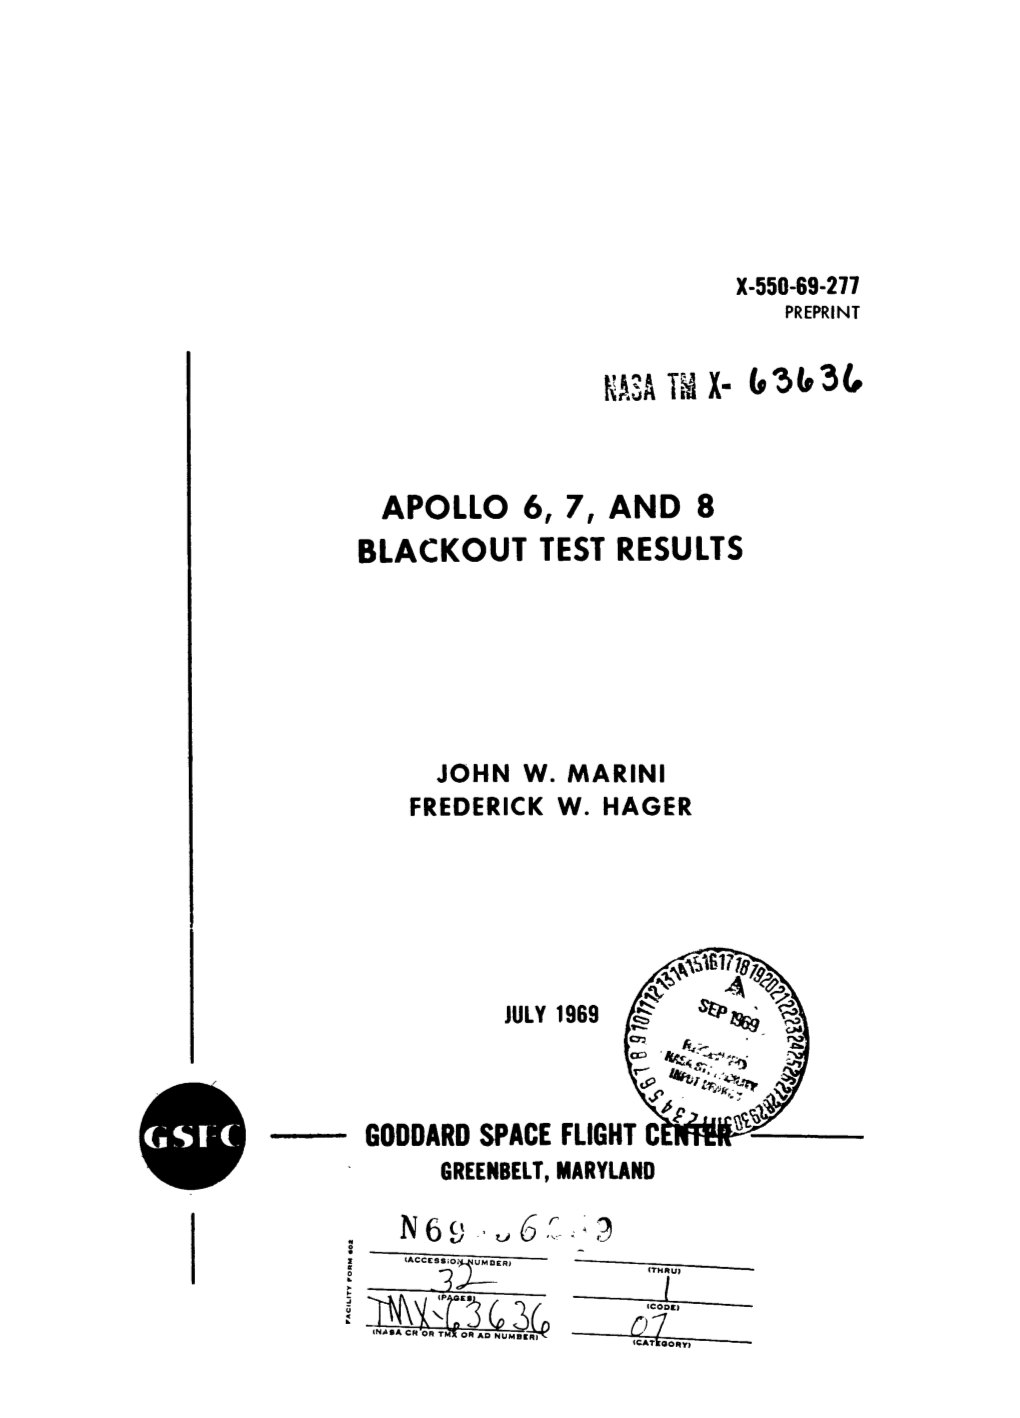 APOLLO 6,7, and a BLACKOUT TEST RESULTS